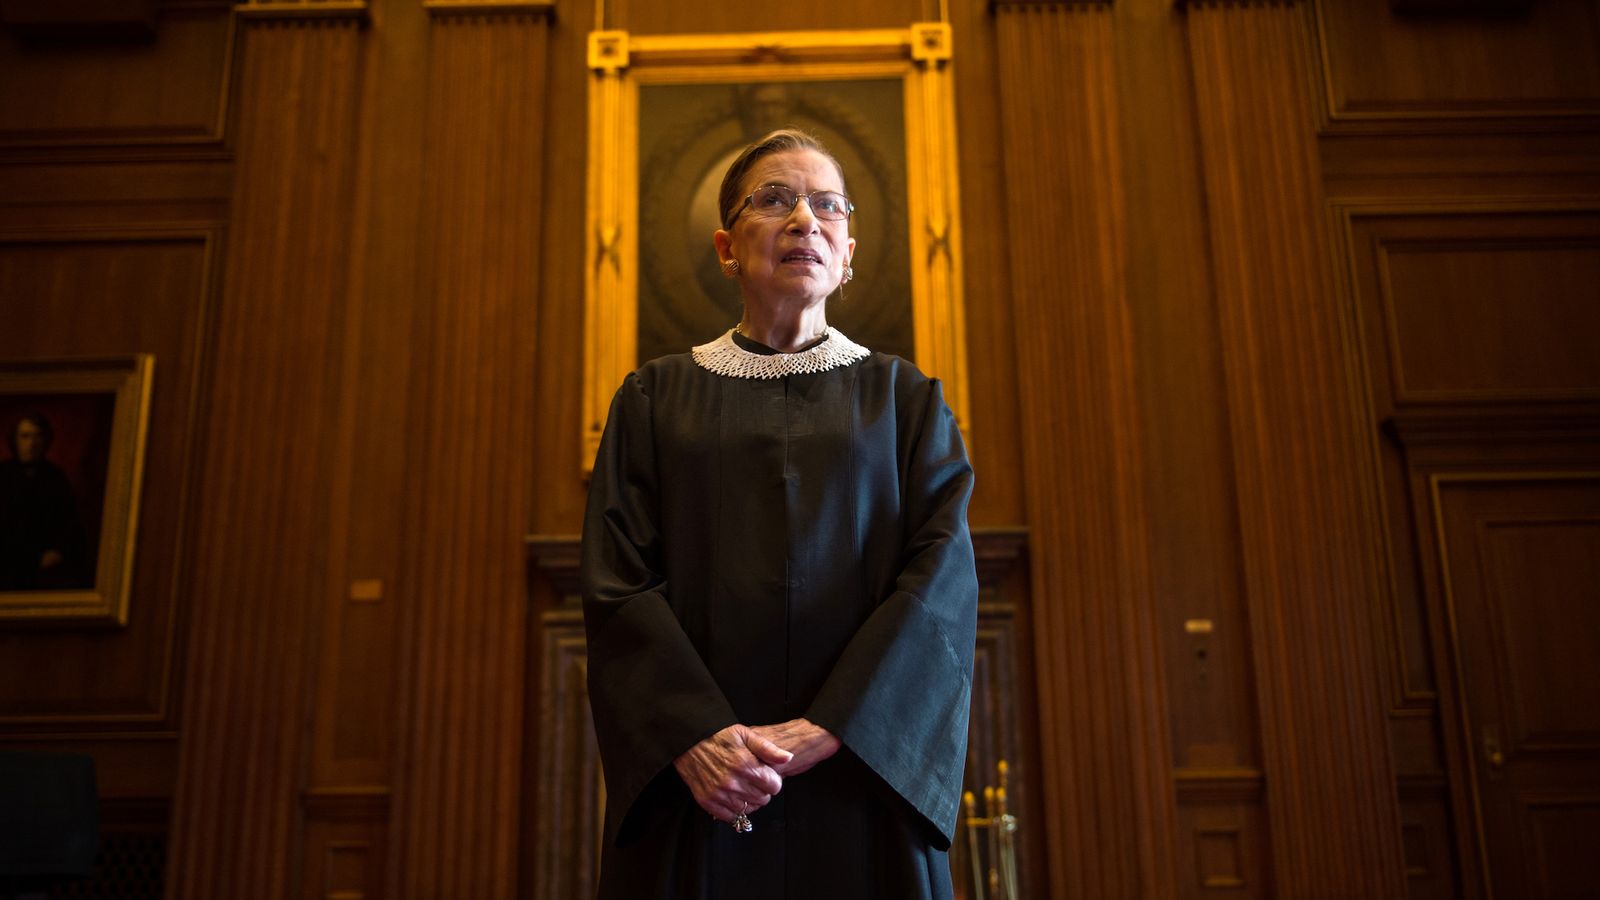 Ruth Bader Ginsburg’s Personal Library Is Up for Auction | Smart News